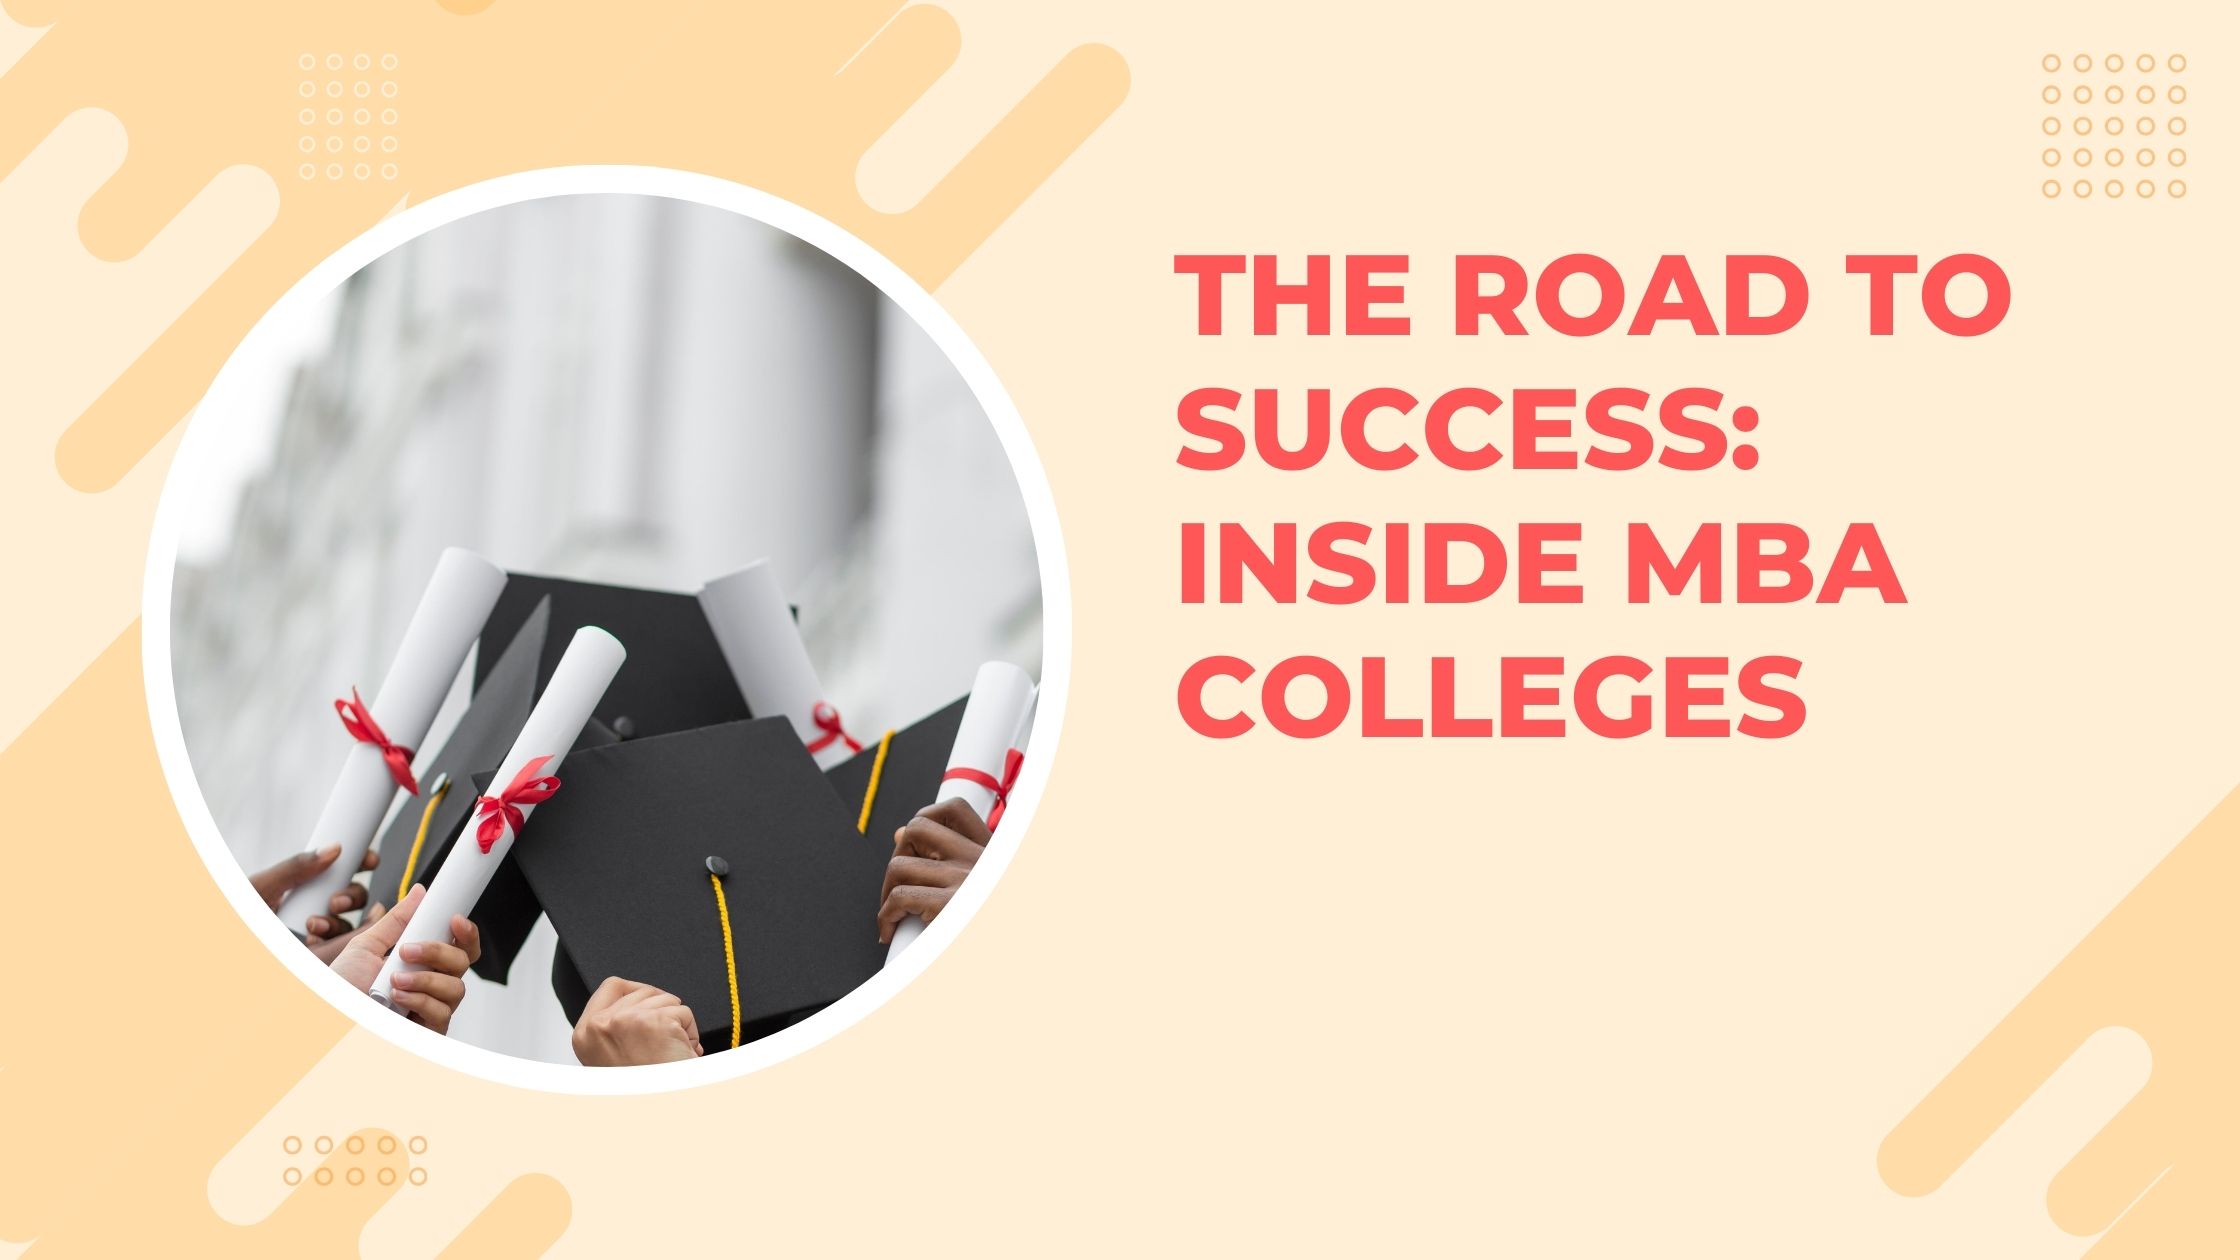 The Road to Success: Inside MBA Colleges